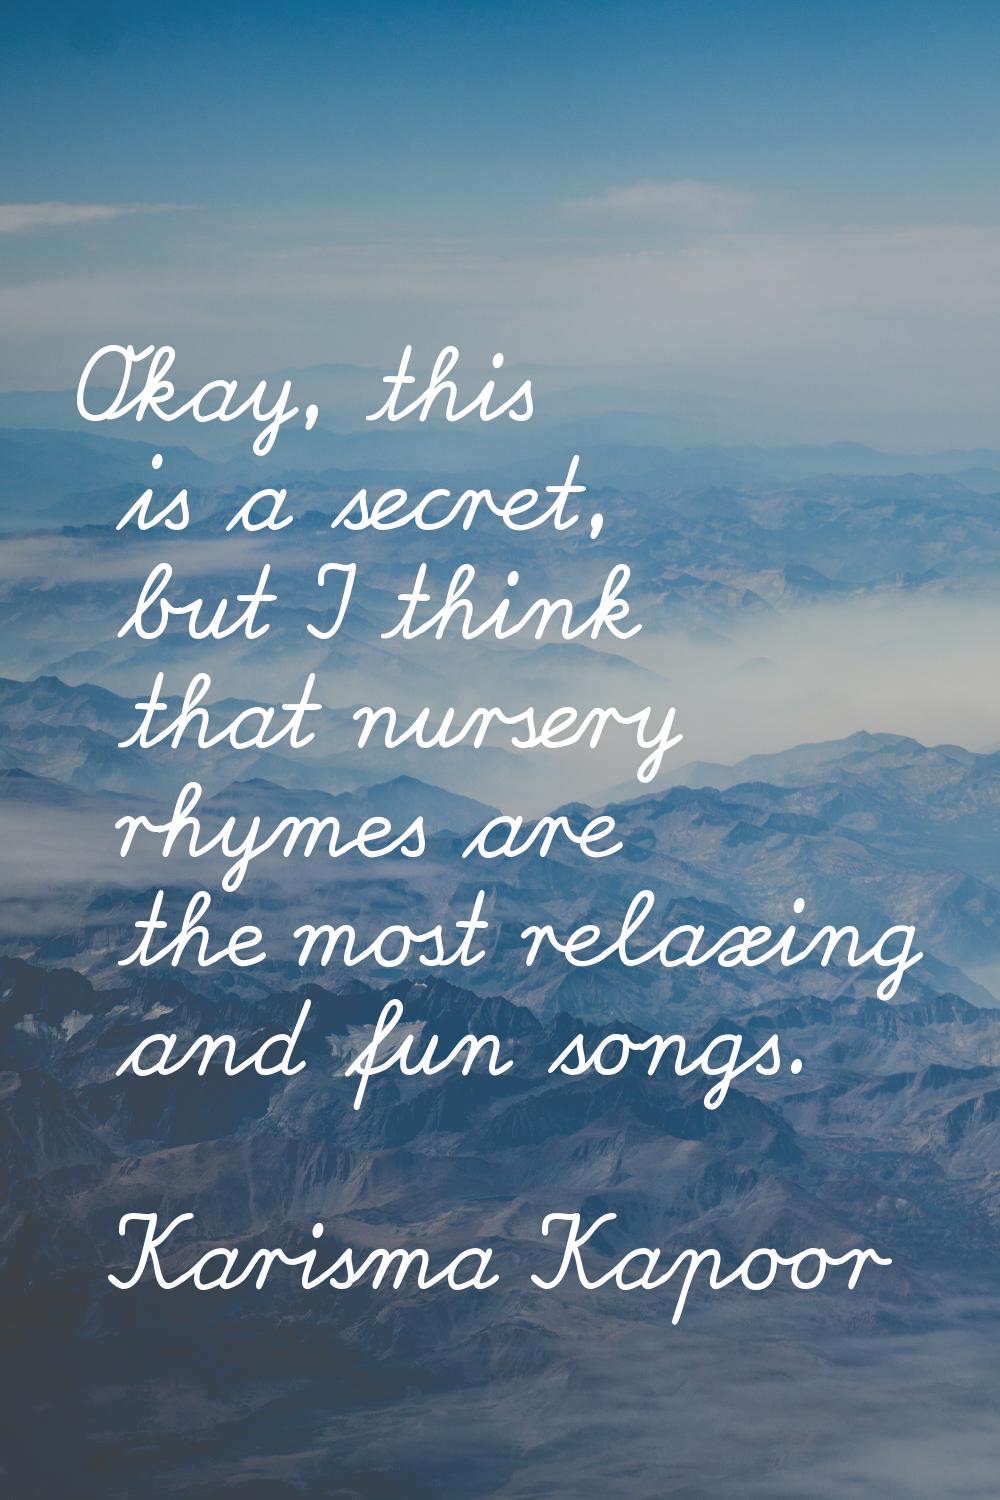 Okay, this is a secret, but I think that nursery rhymes are the most relaxing and fun songs.